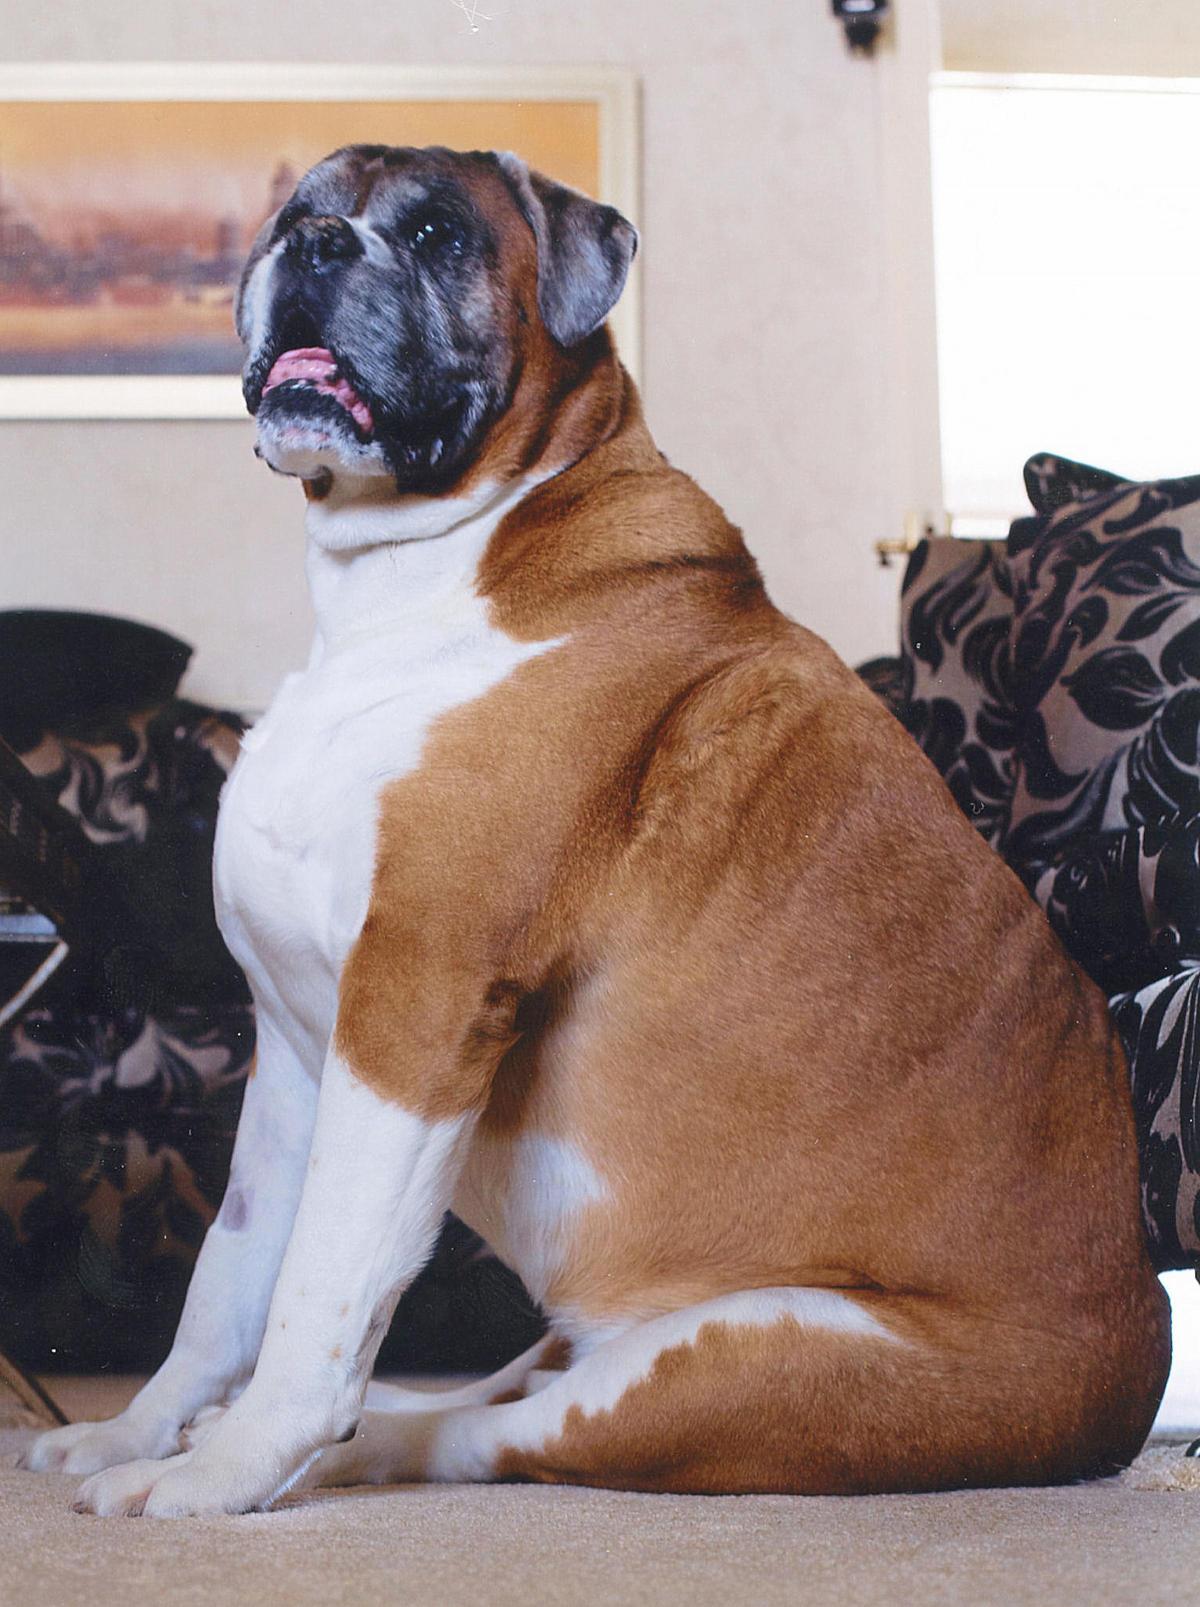 Boxer dog Bruce from Gillingham, who weighs 55kg